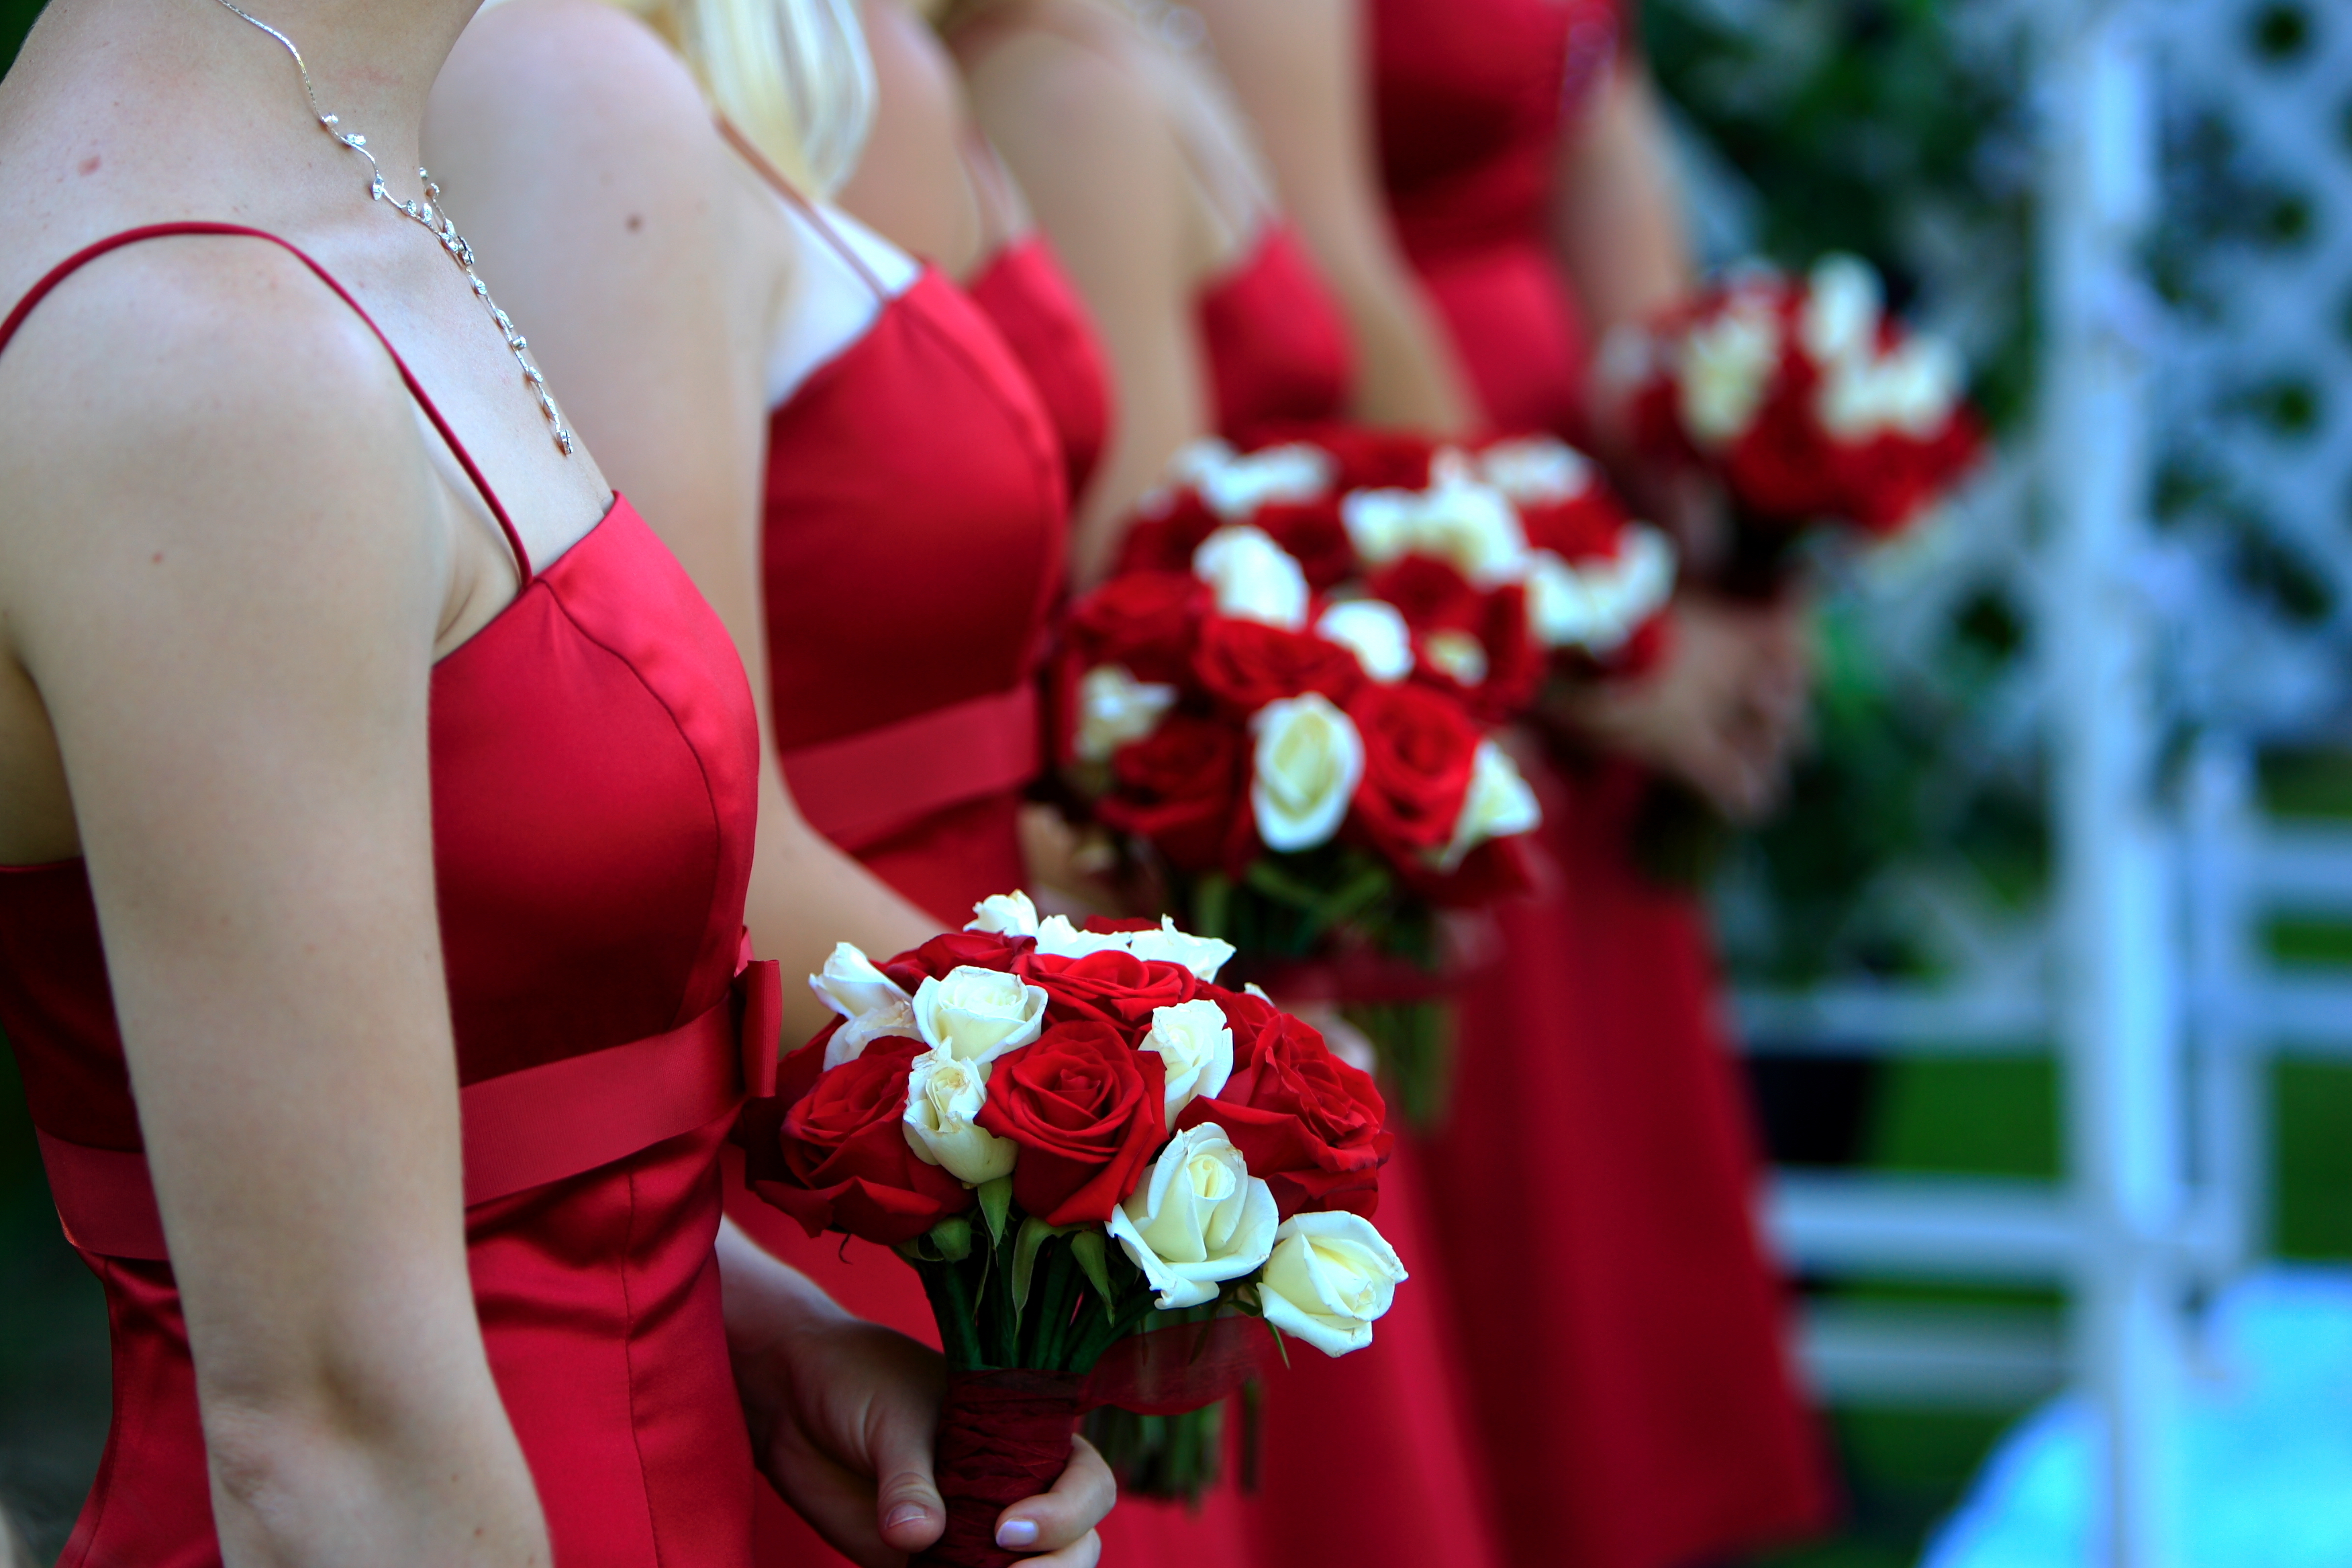 A row of bridesmaids wearing read dresses and holding flower bouquets | Source: Shutterstock